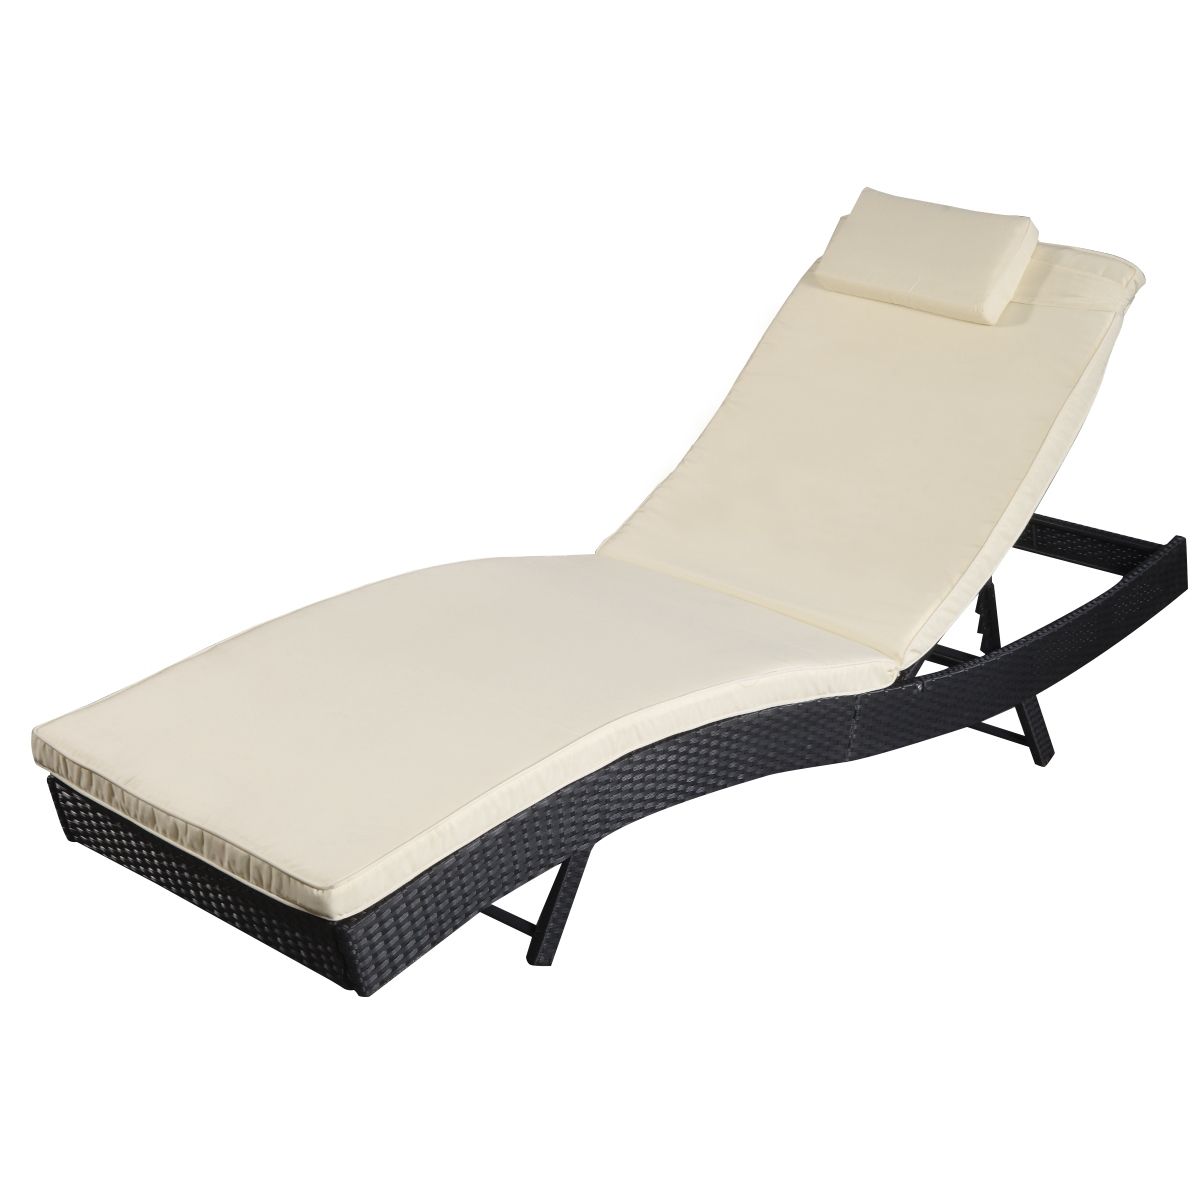 Chaise Lounge Chairs For Outdoors Inside Widely Used Costway Adjustable Pool Chaise Lounge Chair Outdoor Patio (View 13 of 15)